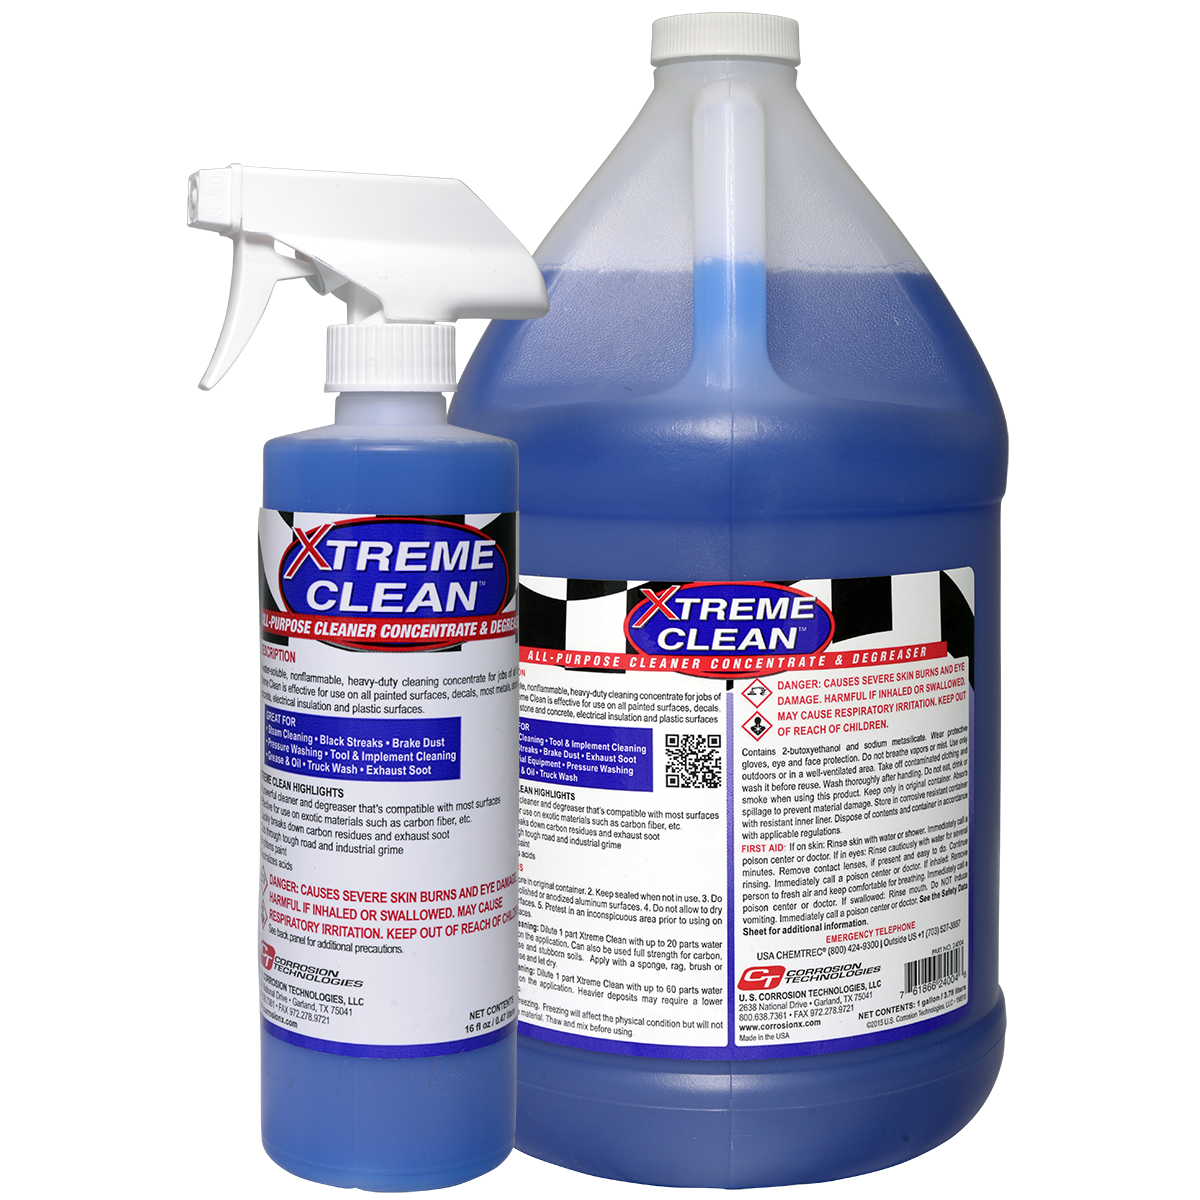 Xtreme Clean general purpose cleaner / degreaser